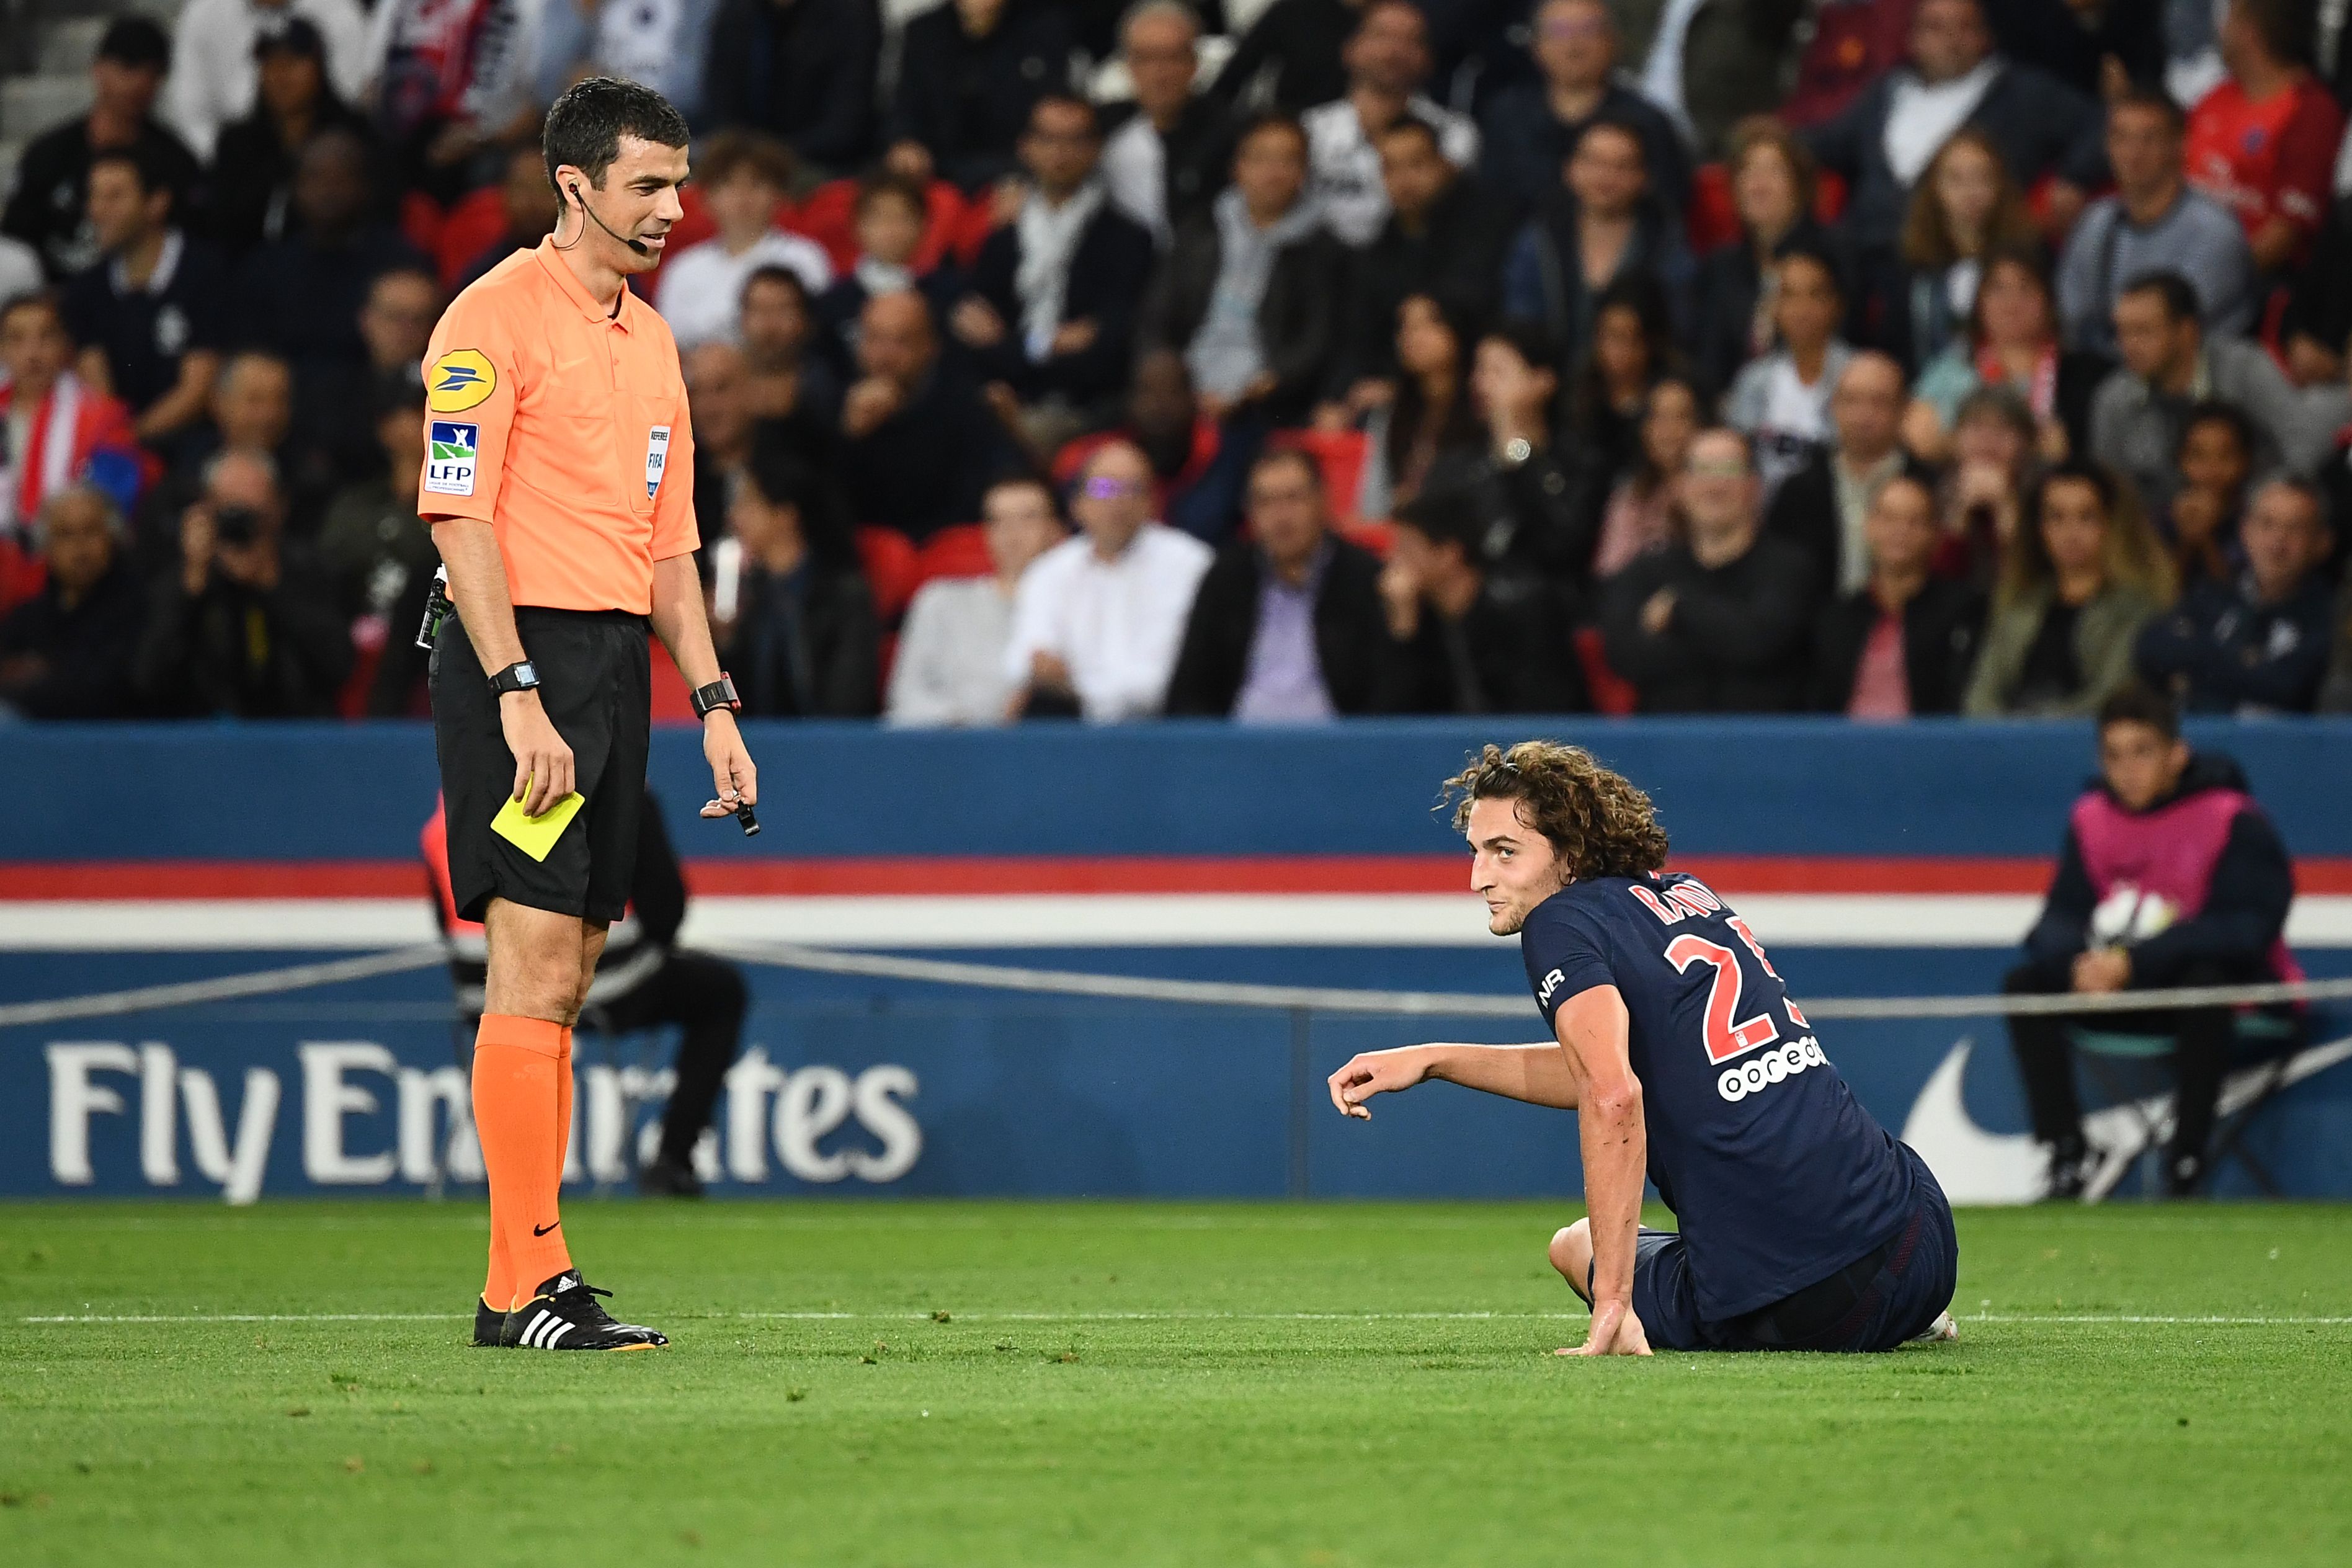 Paris Saint-Germain's French midfielder Adrien Rabiot (R) receives a yellow card from French referee Frank Schneider during the French L1 football match between Paris Saint-Germain (PSG) and Saint-Etienne (ASSE) at the Parc des Princes stadium in Paris on September 14, 2018. (Photo by Anne-Christine POUJOULAT / AFP)        (Photo credit should read ANNE-CHRISTINE POUJOULAT/AFP/Getty Images)